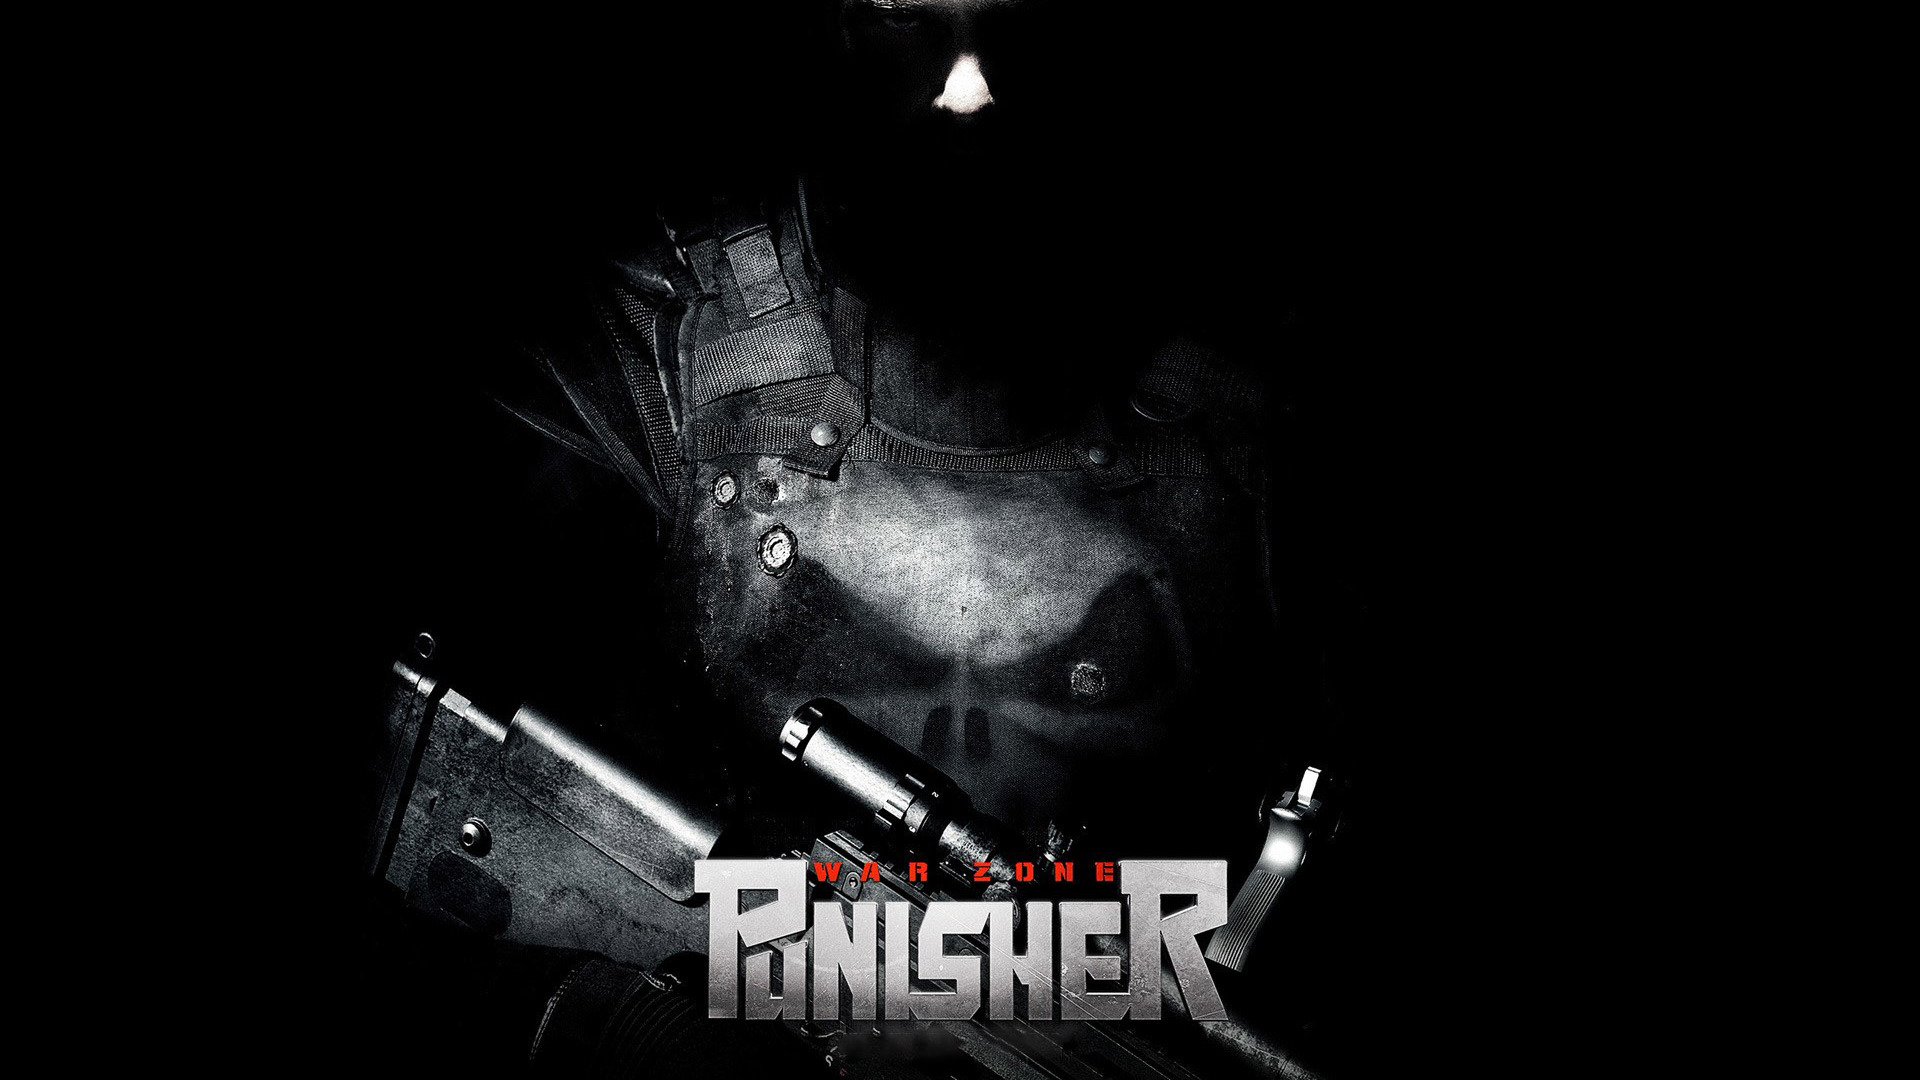 Download The Punisher 1920x1080 Wallpaper 1920x1080